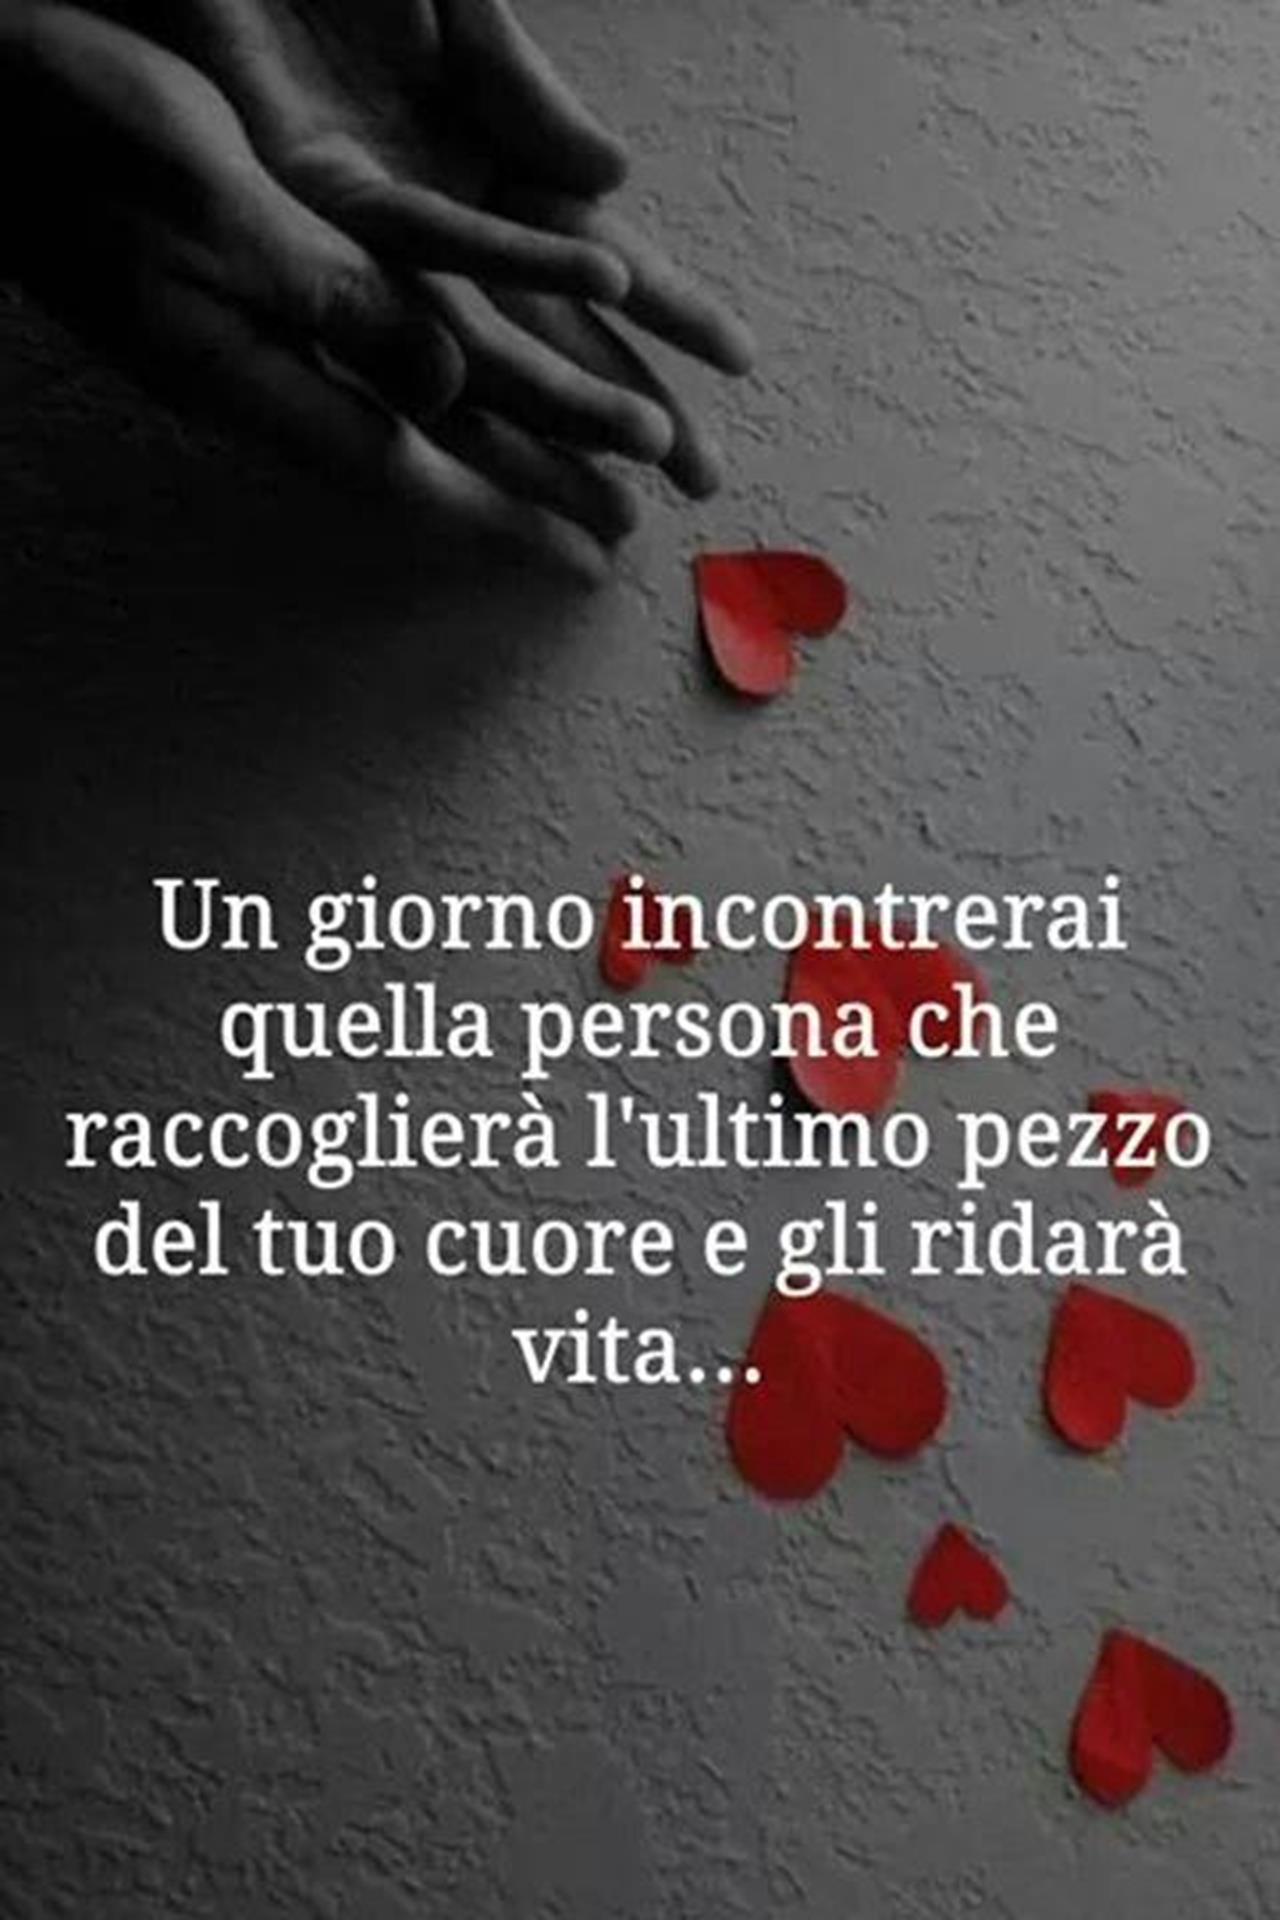 Belle frasi di amore for Android - APK Download